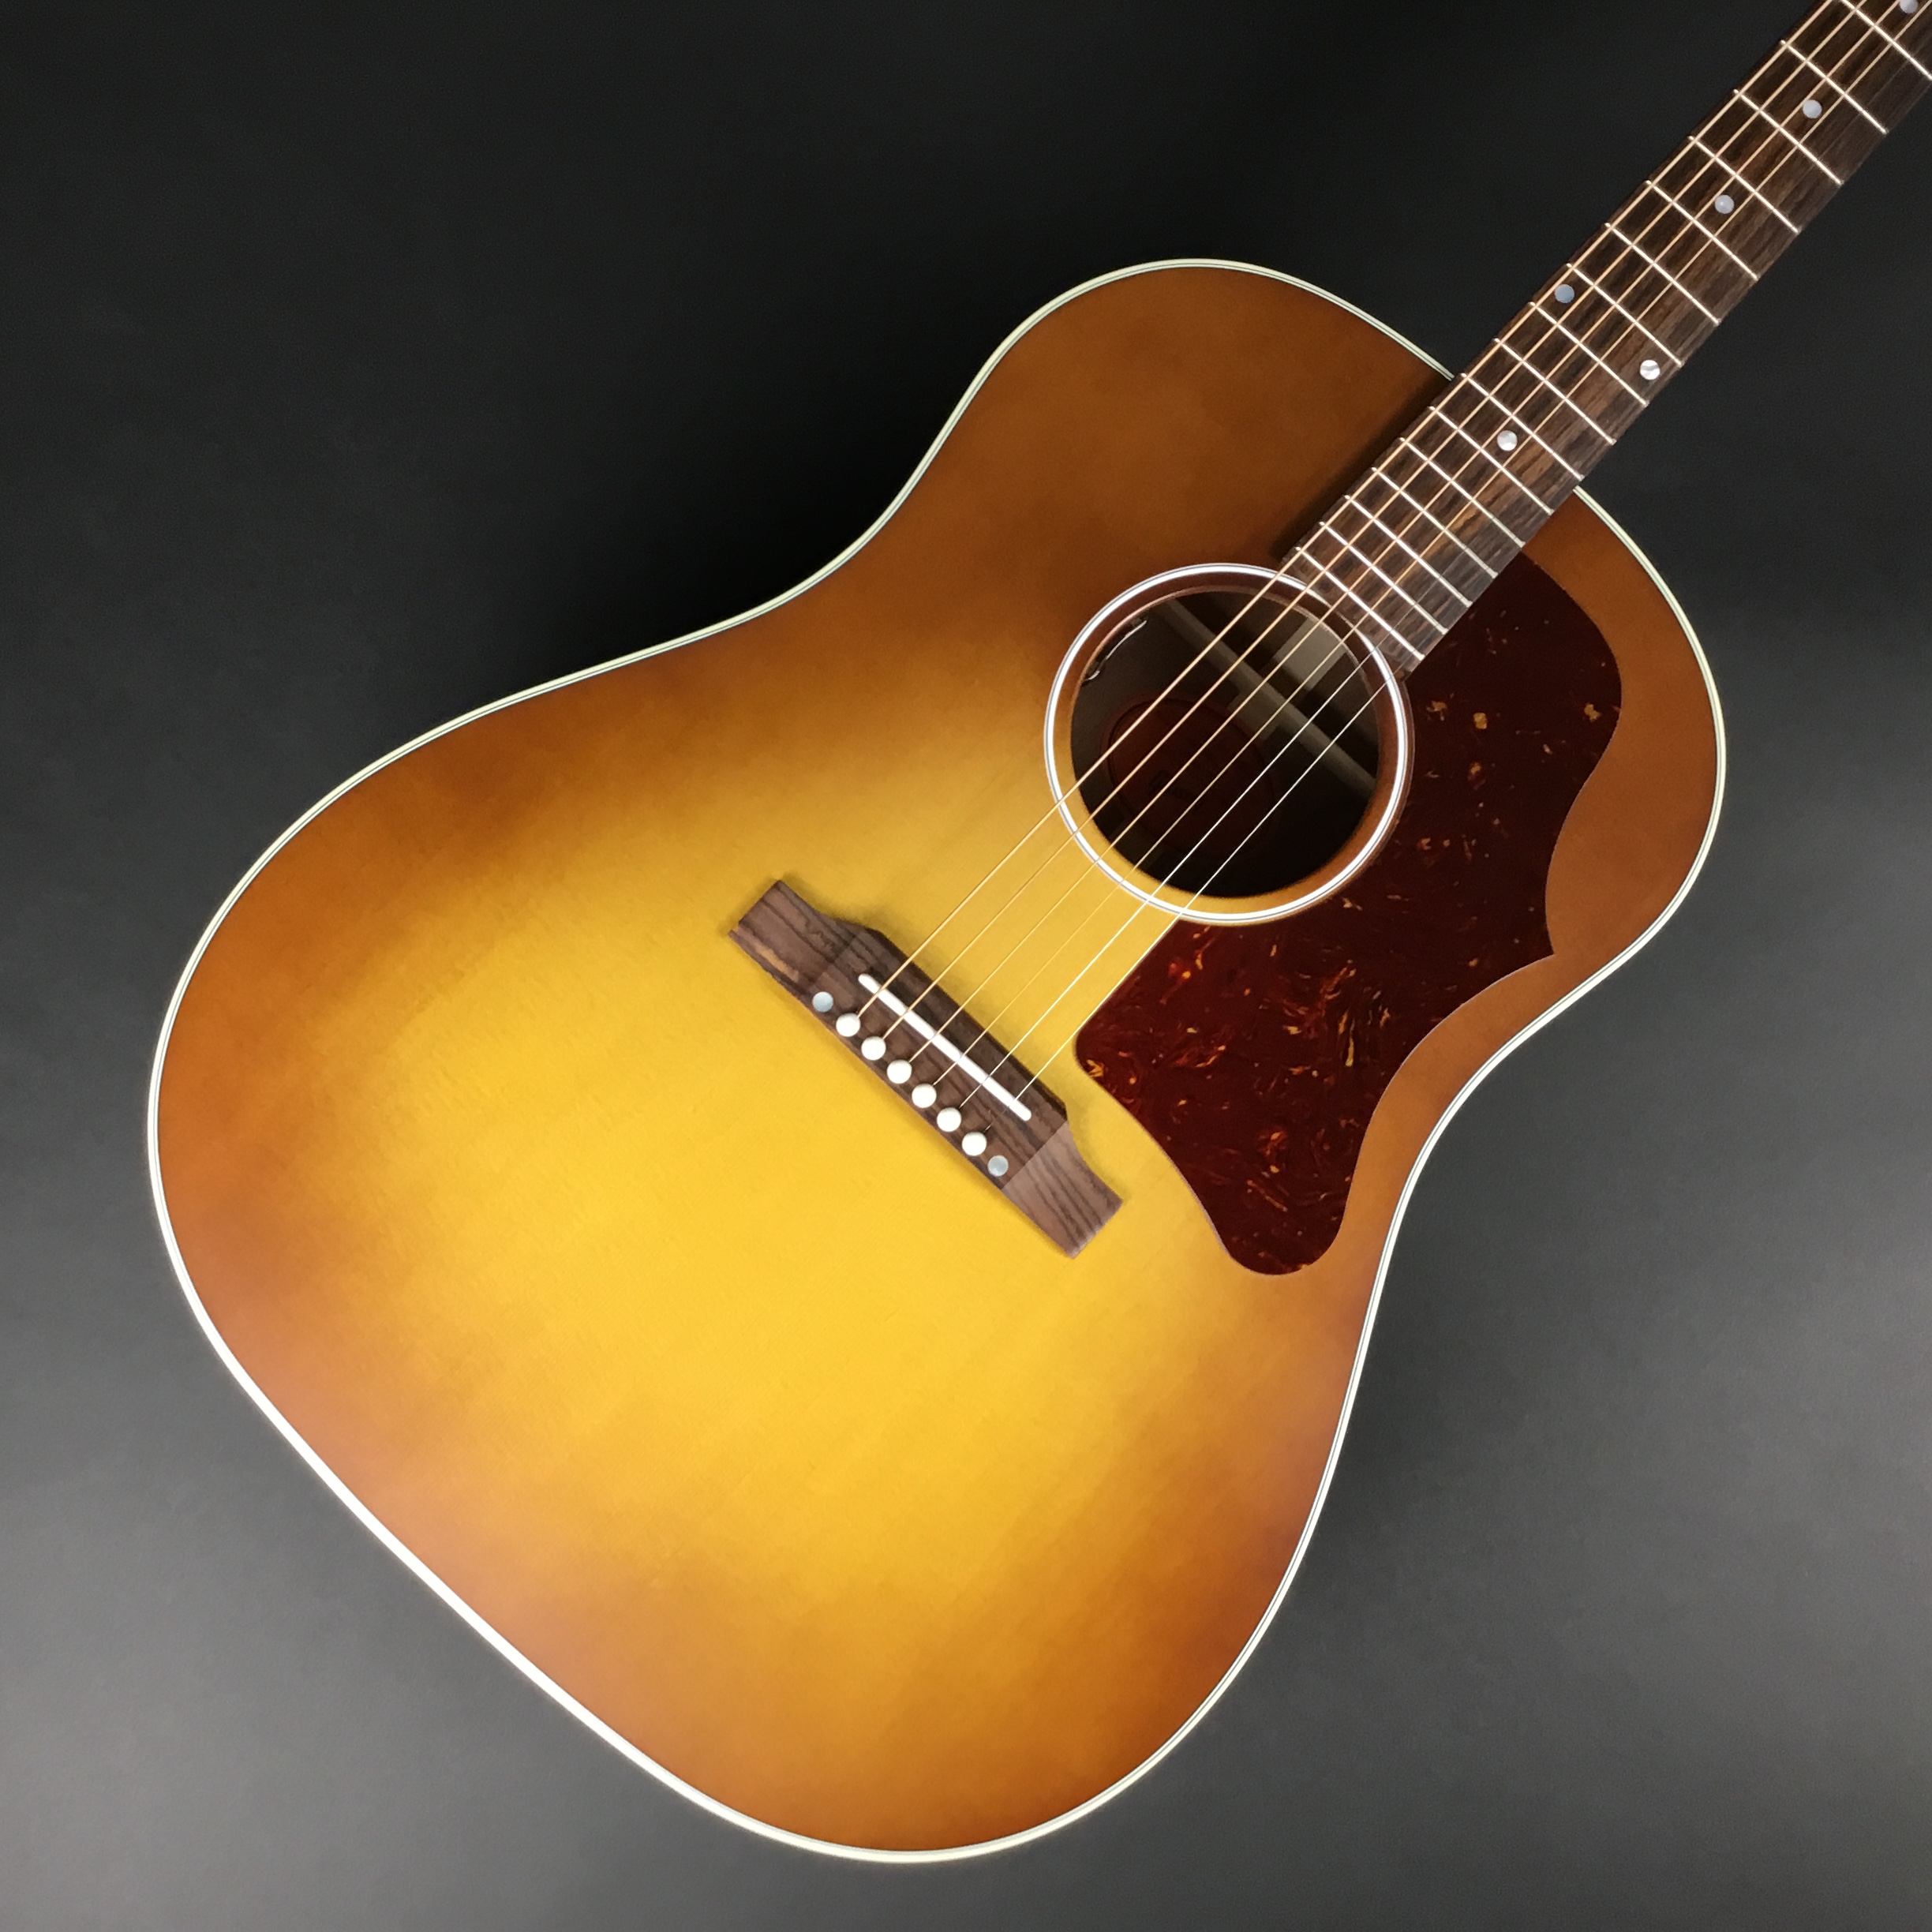 Gibson J-45 Faded 50s